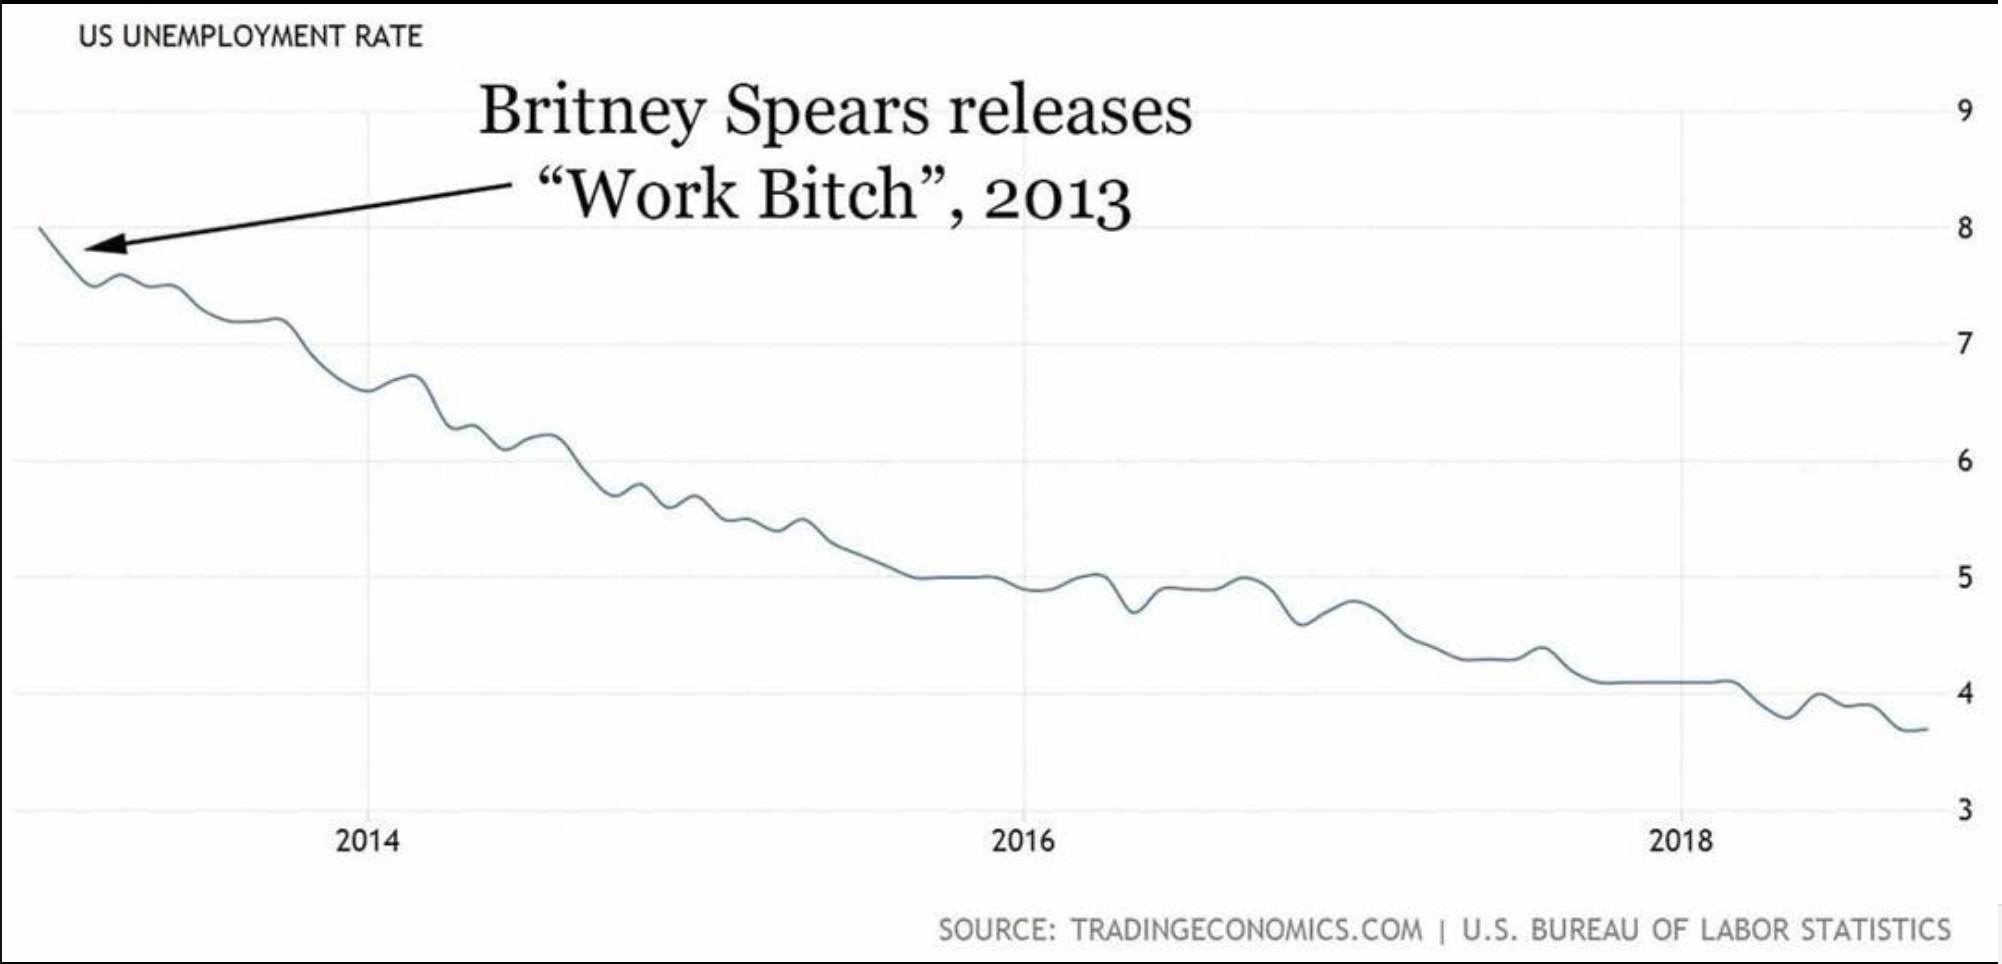 Britney Spears knows how to motivate a nation